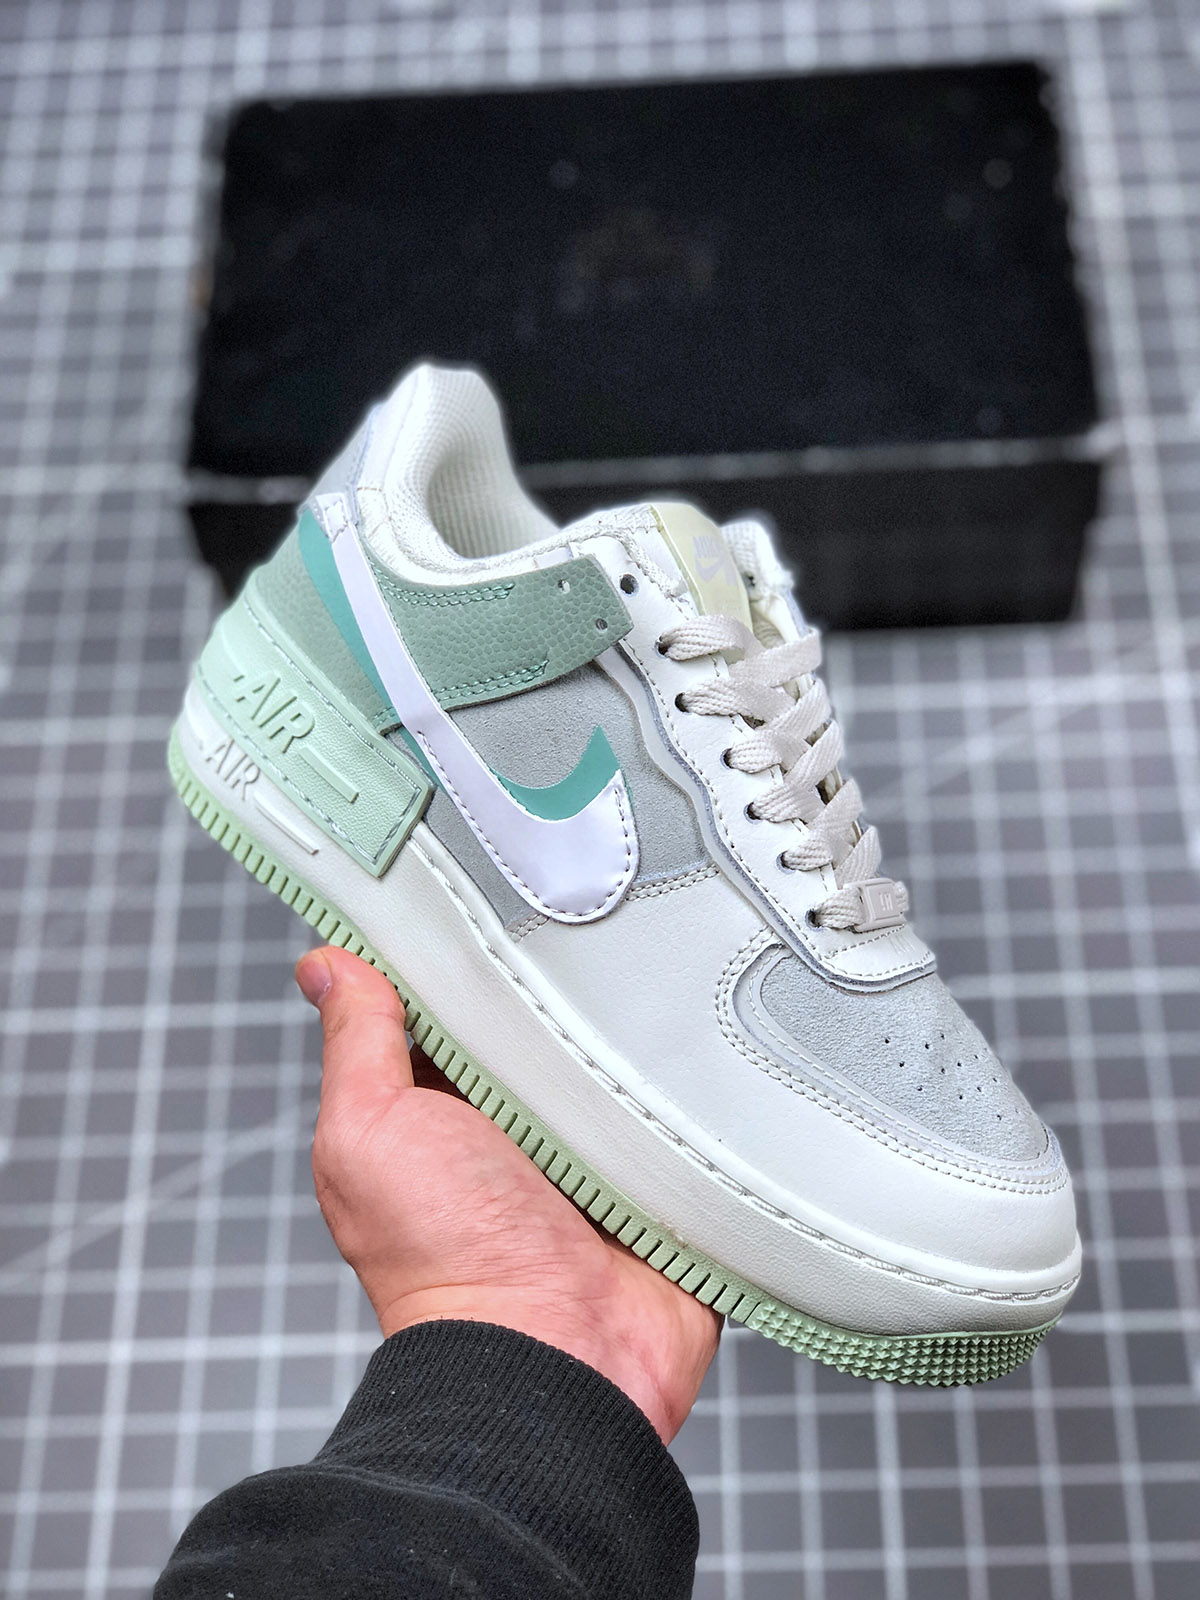 Nike Air Force 1 “Shadow” Spruce Aura/White-Pistachio Frost For ...